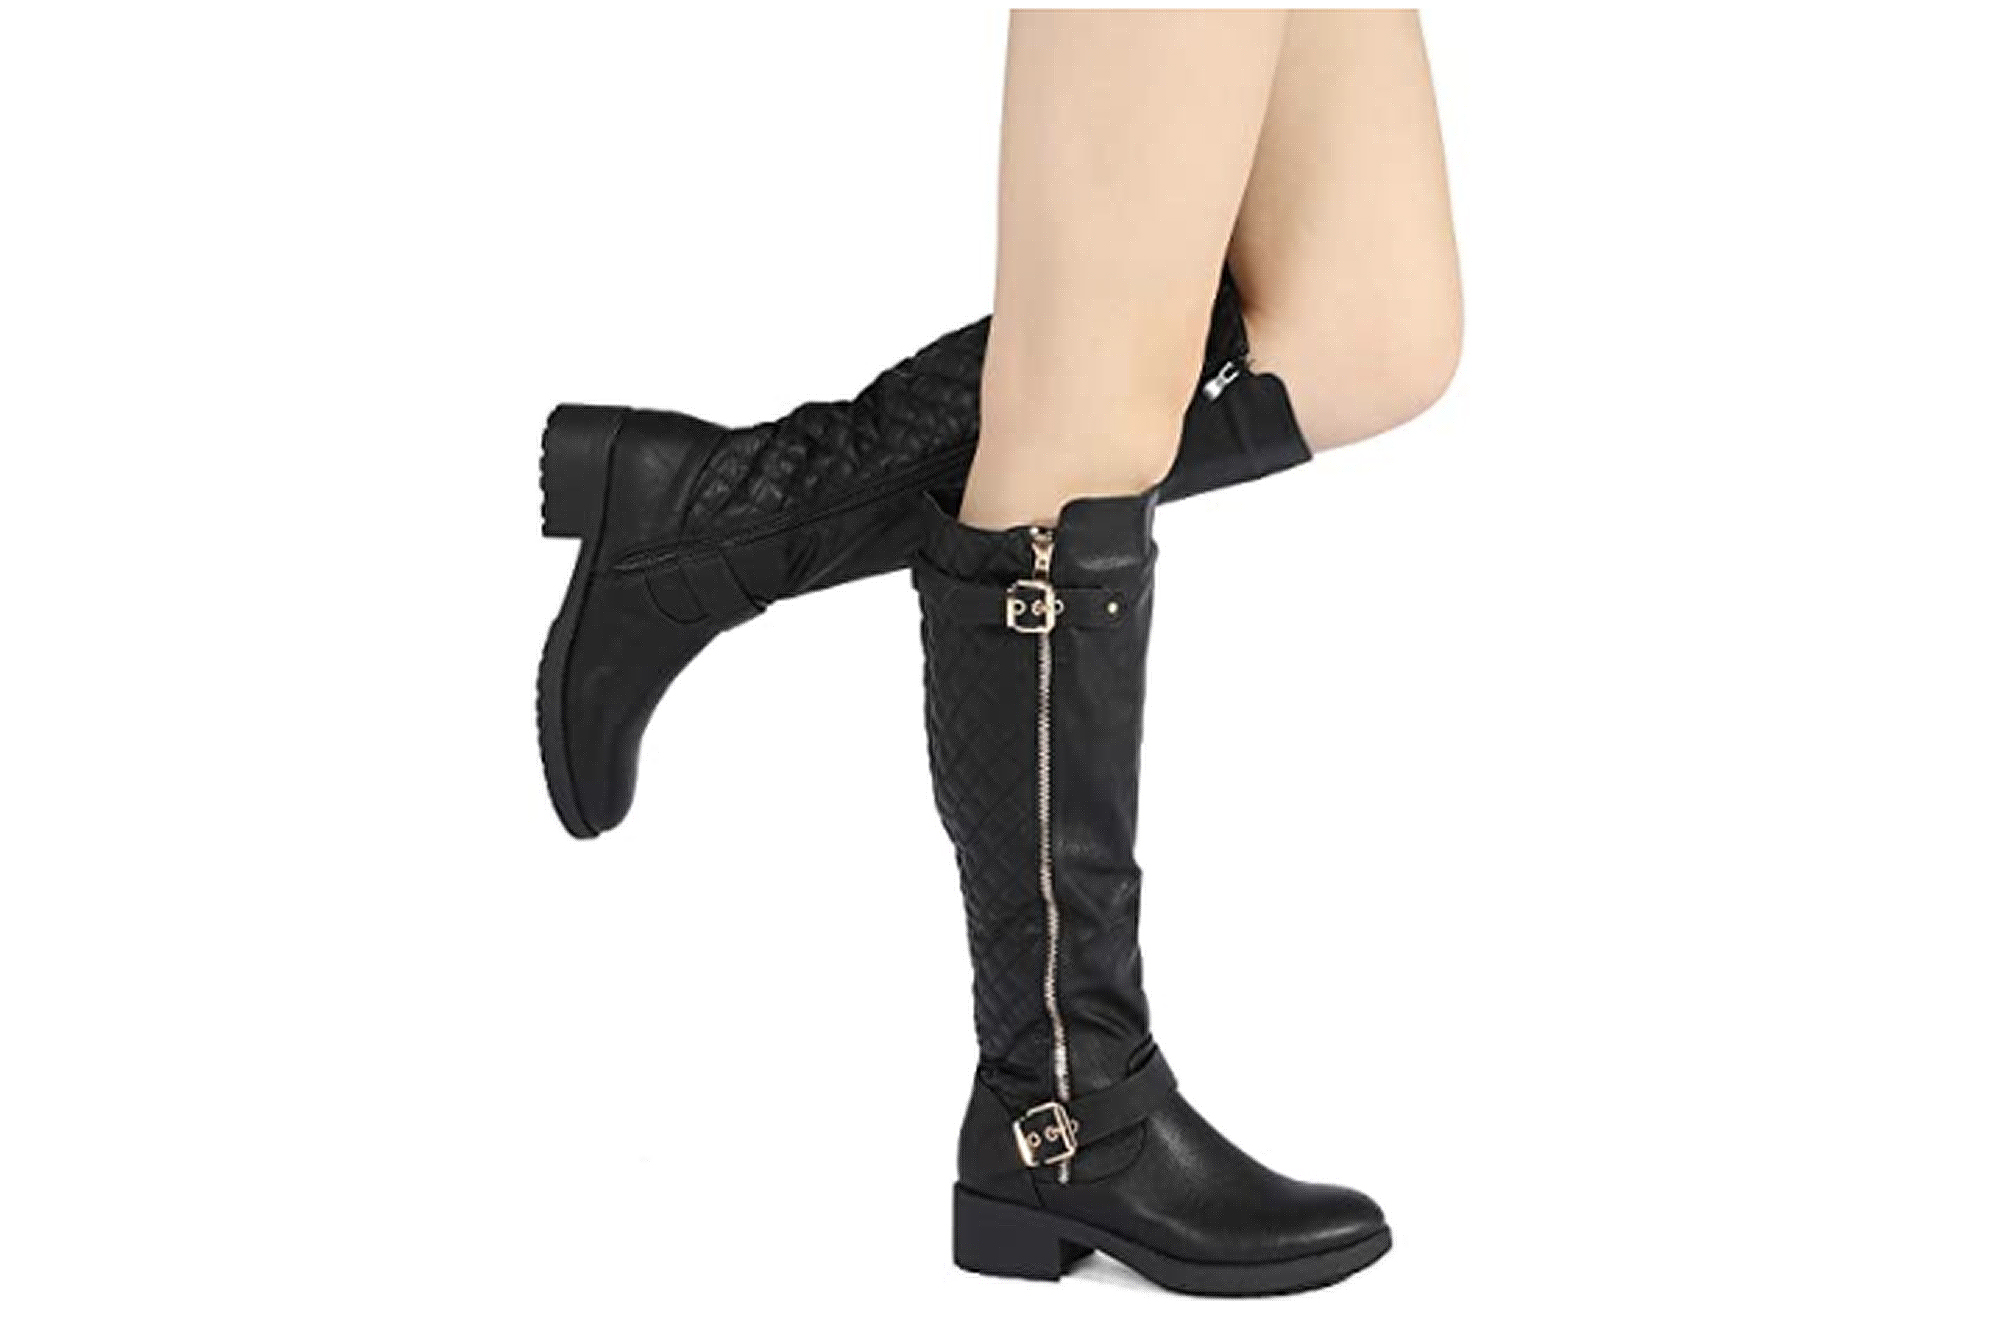 Dream Pairs Faux Leather Boots Were 